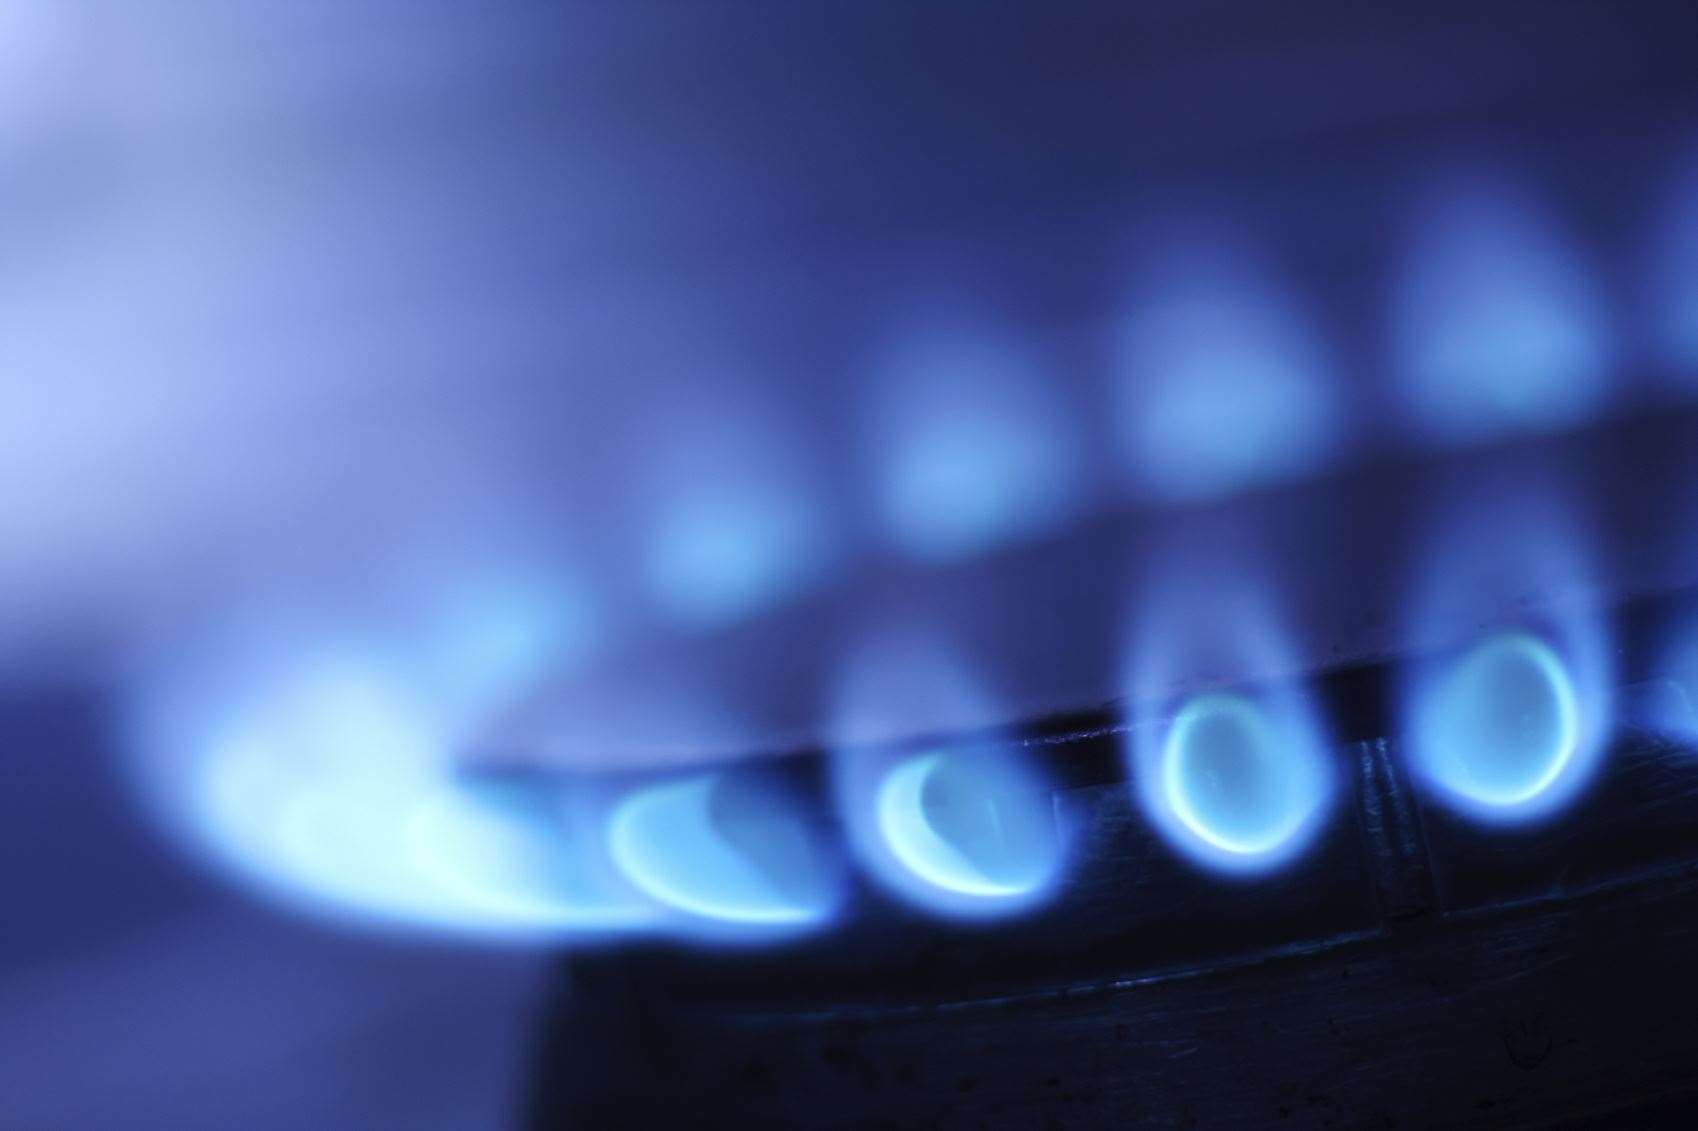 Gas and electricity prices are also to rise this winter